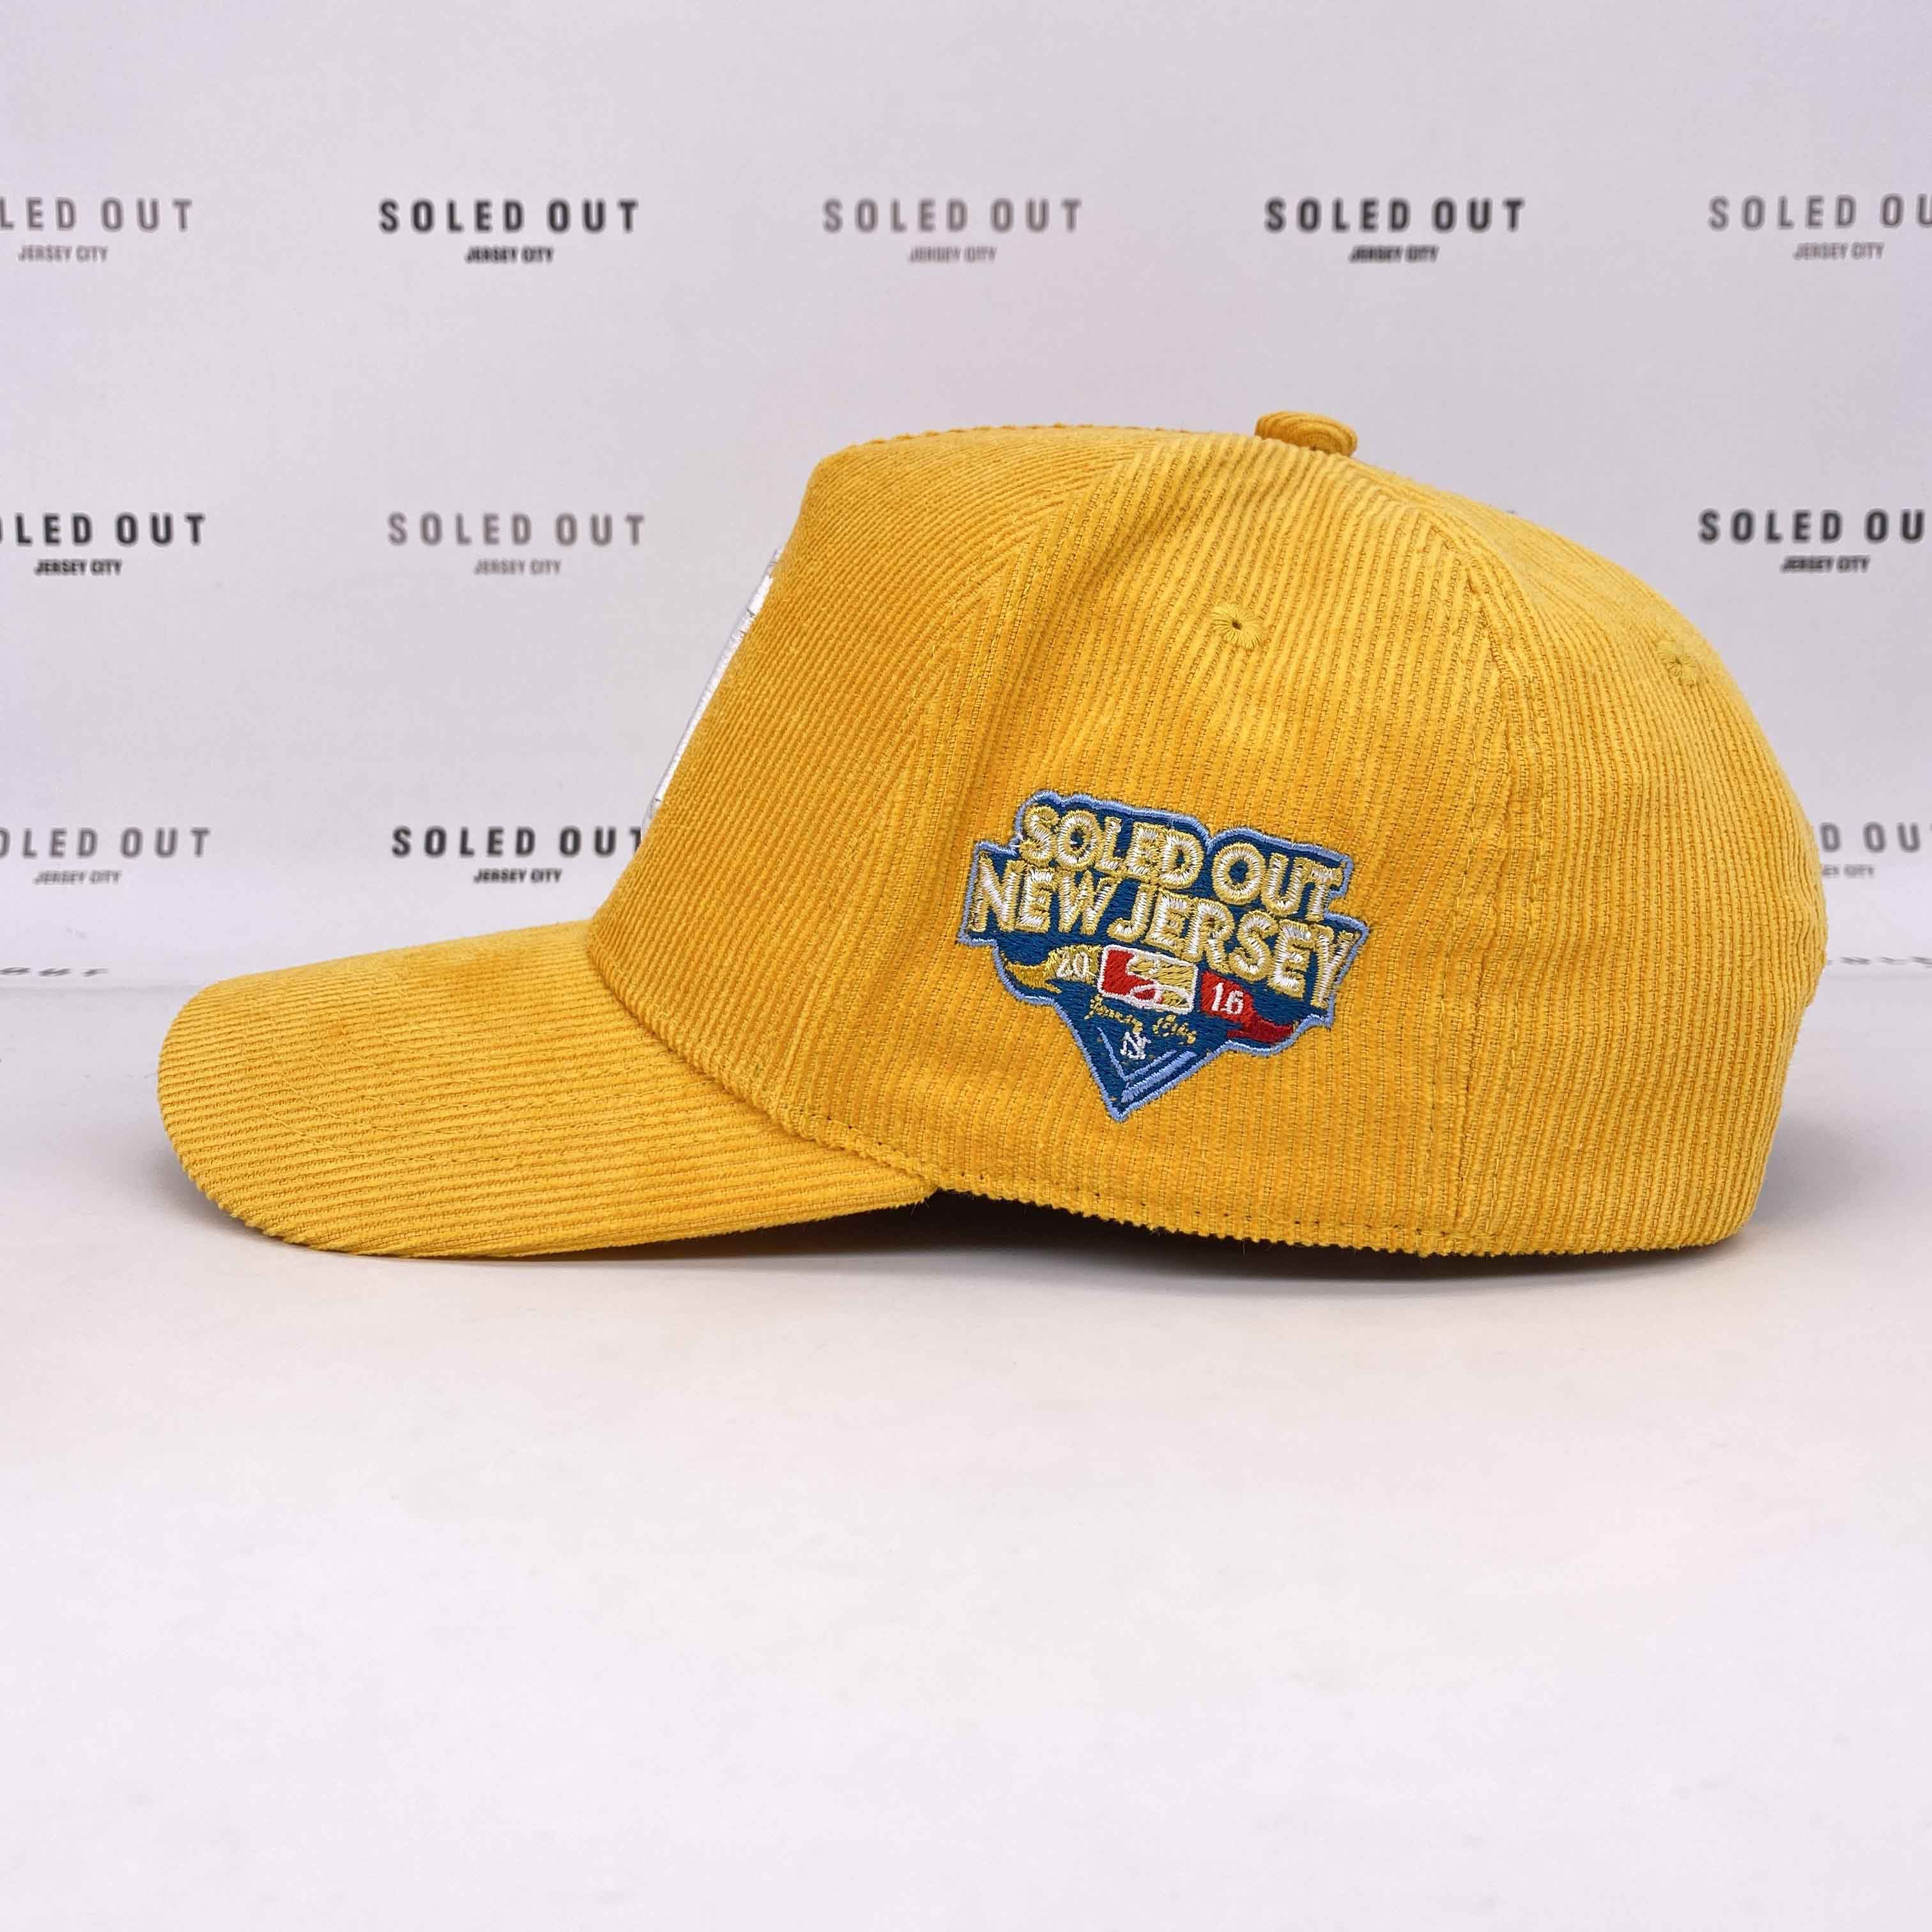 Soled Out Snapback &quot;CORDUROY MUSTARD&quot; 2022 New Size OS